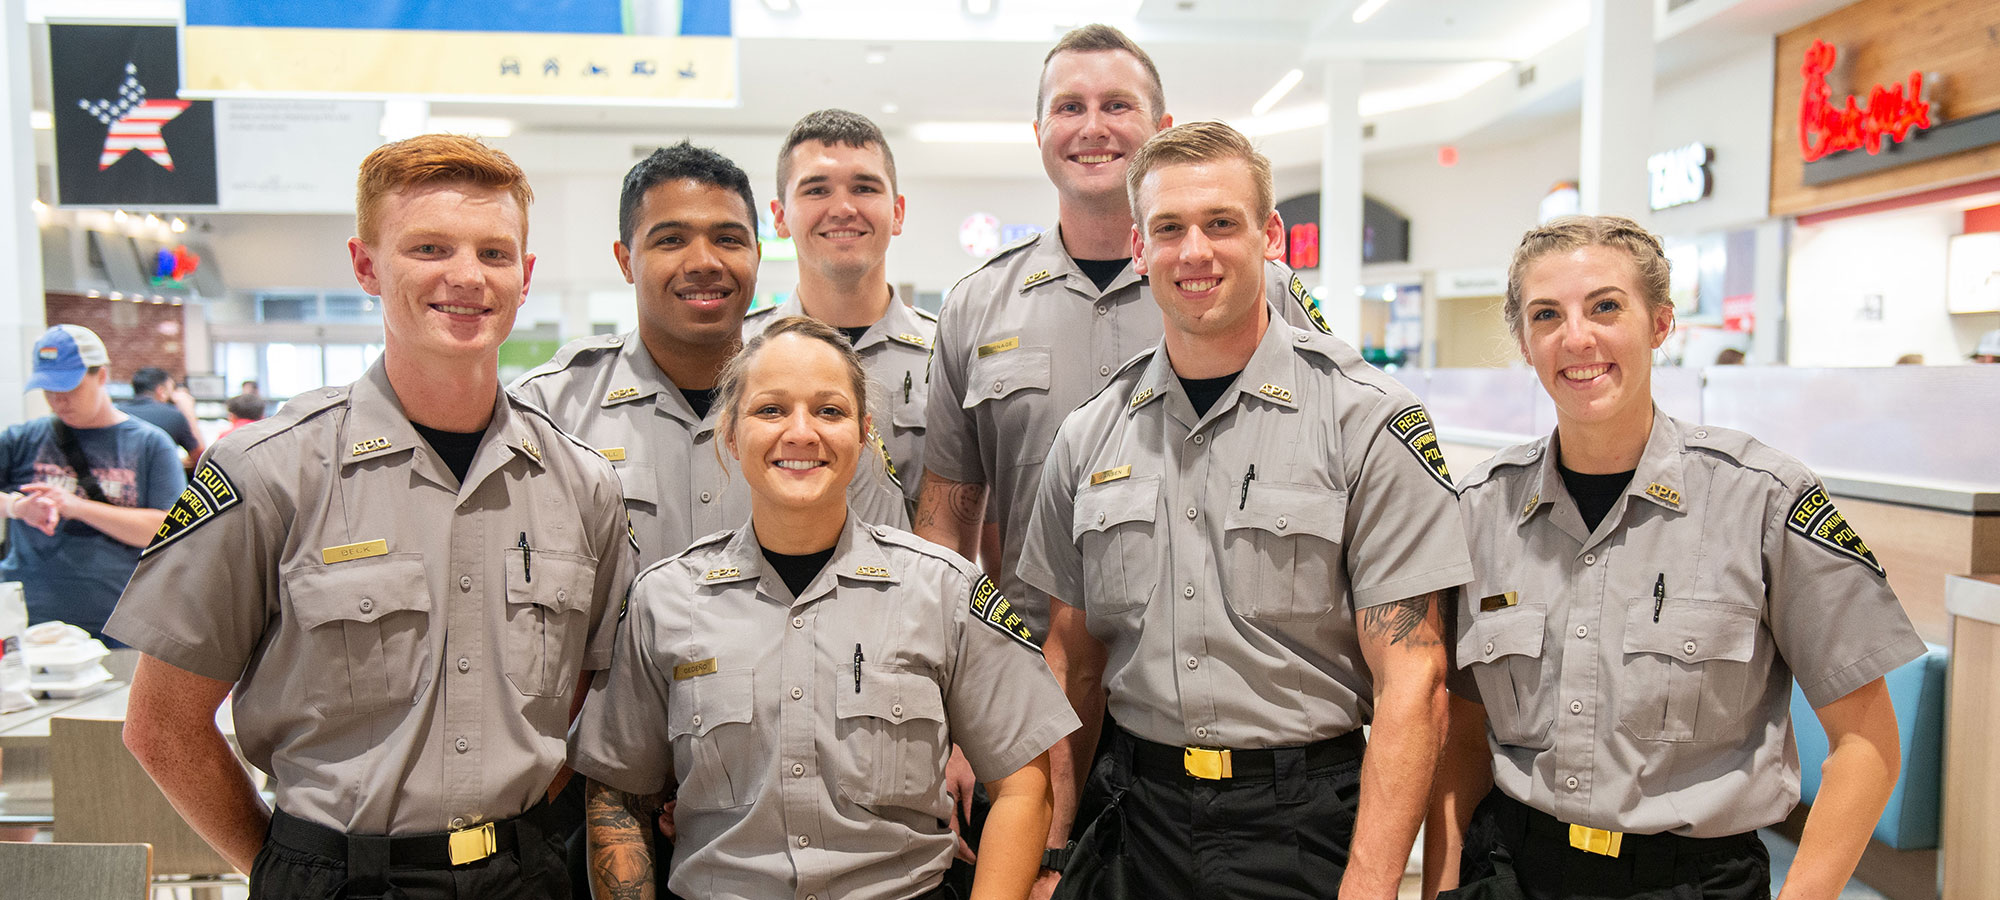 group of new police recruits in an indoor food court